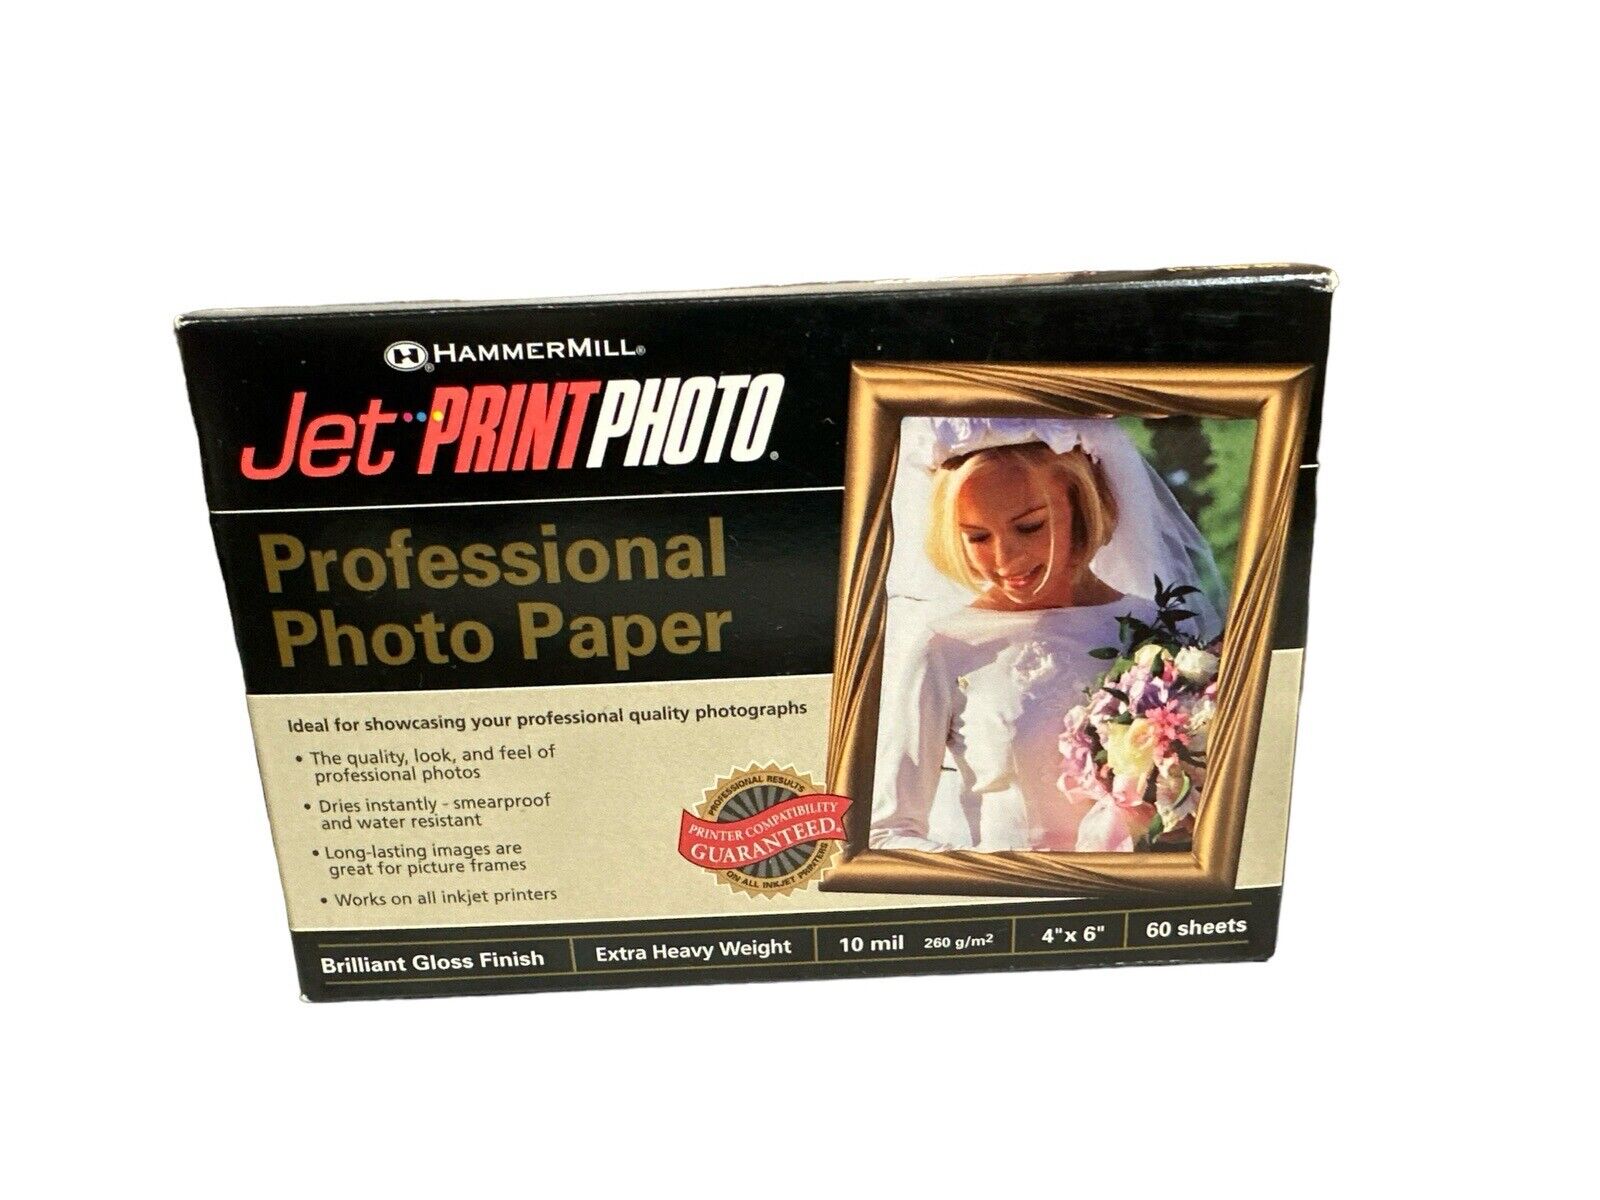 Pack-Professional PhotoPaper Hammermill Jet Print 4x6 10 mil 55 Sheets